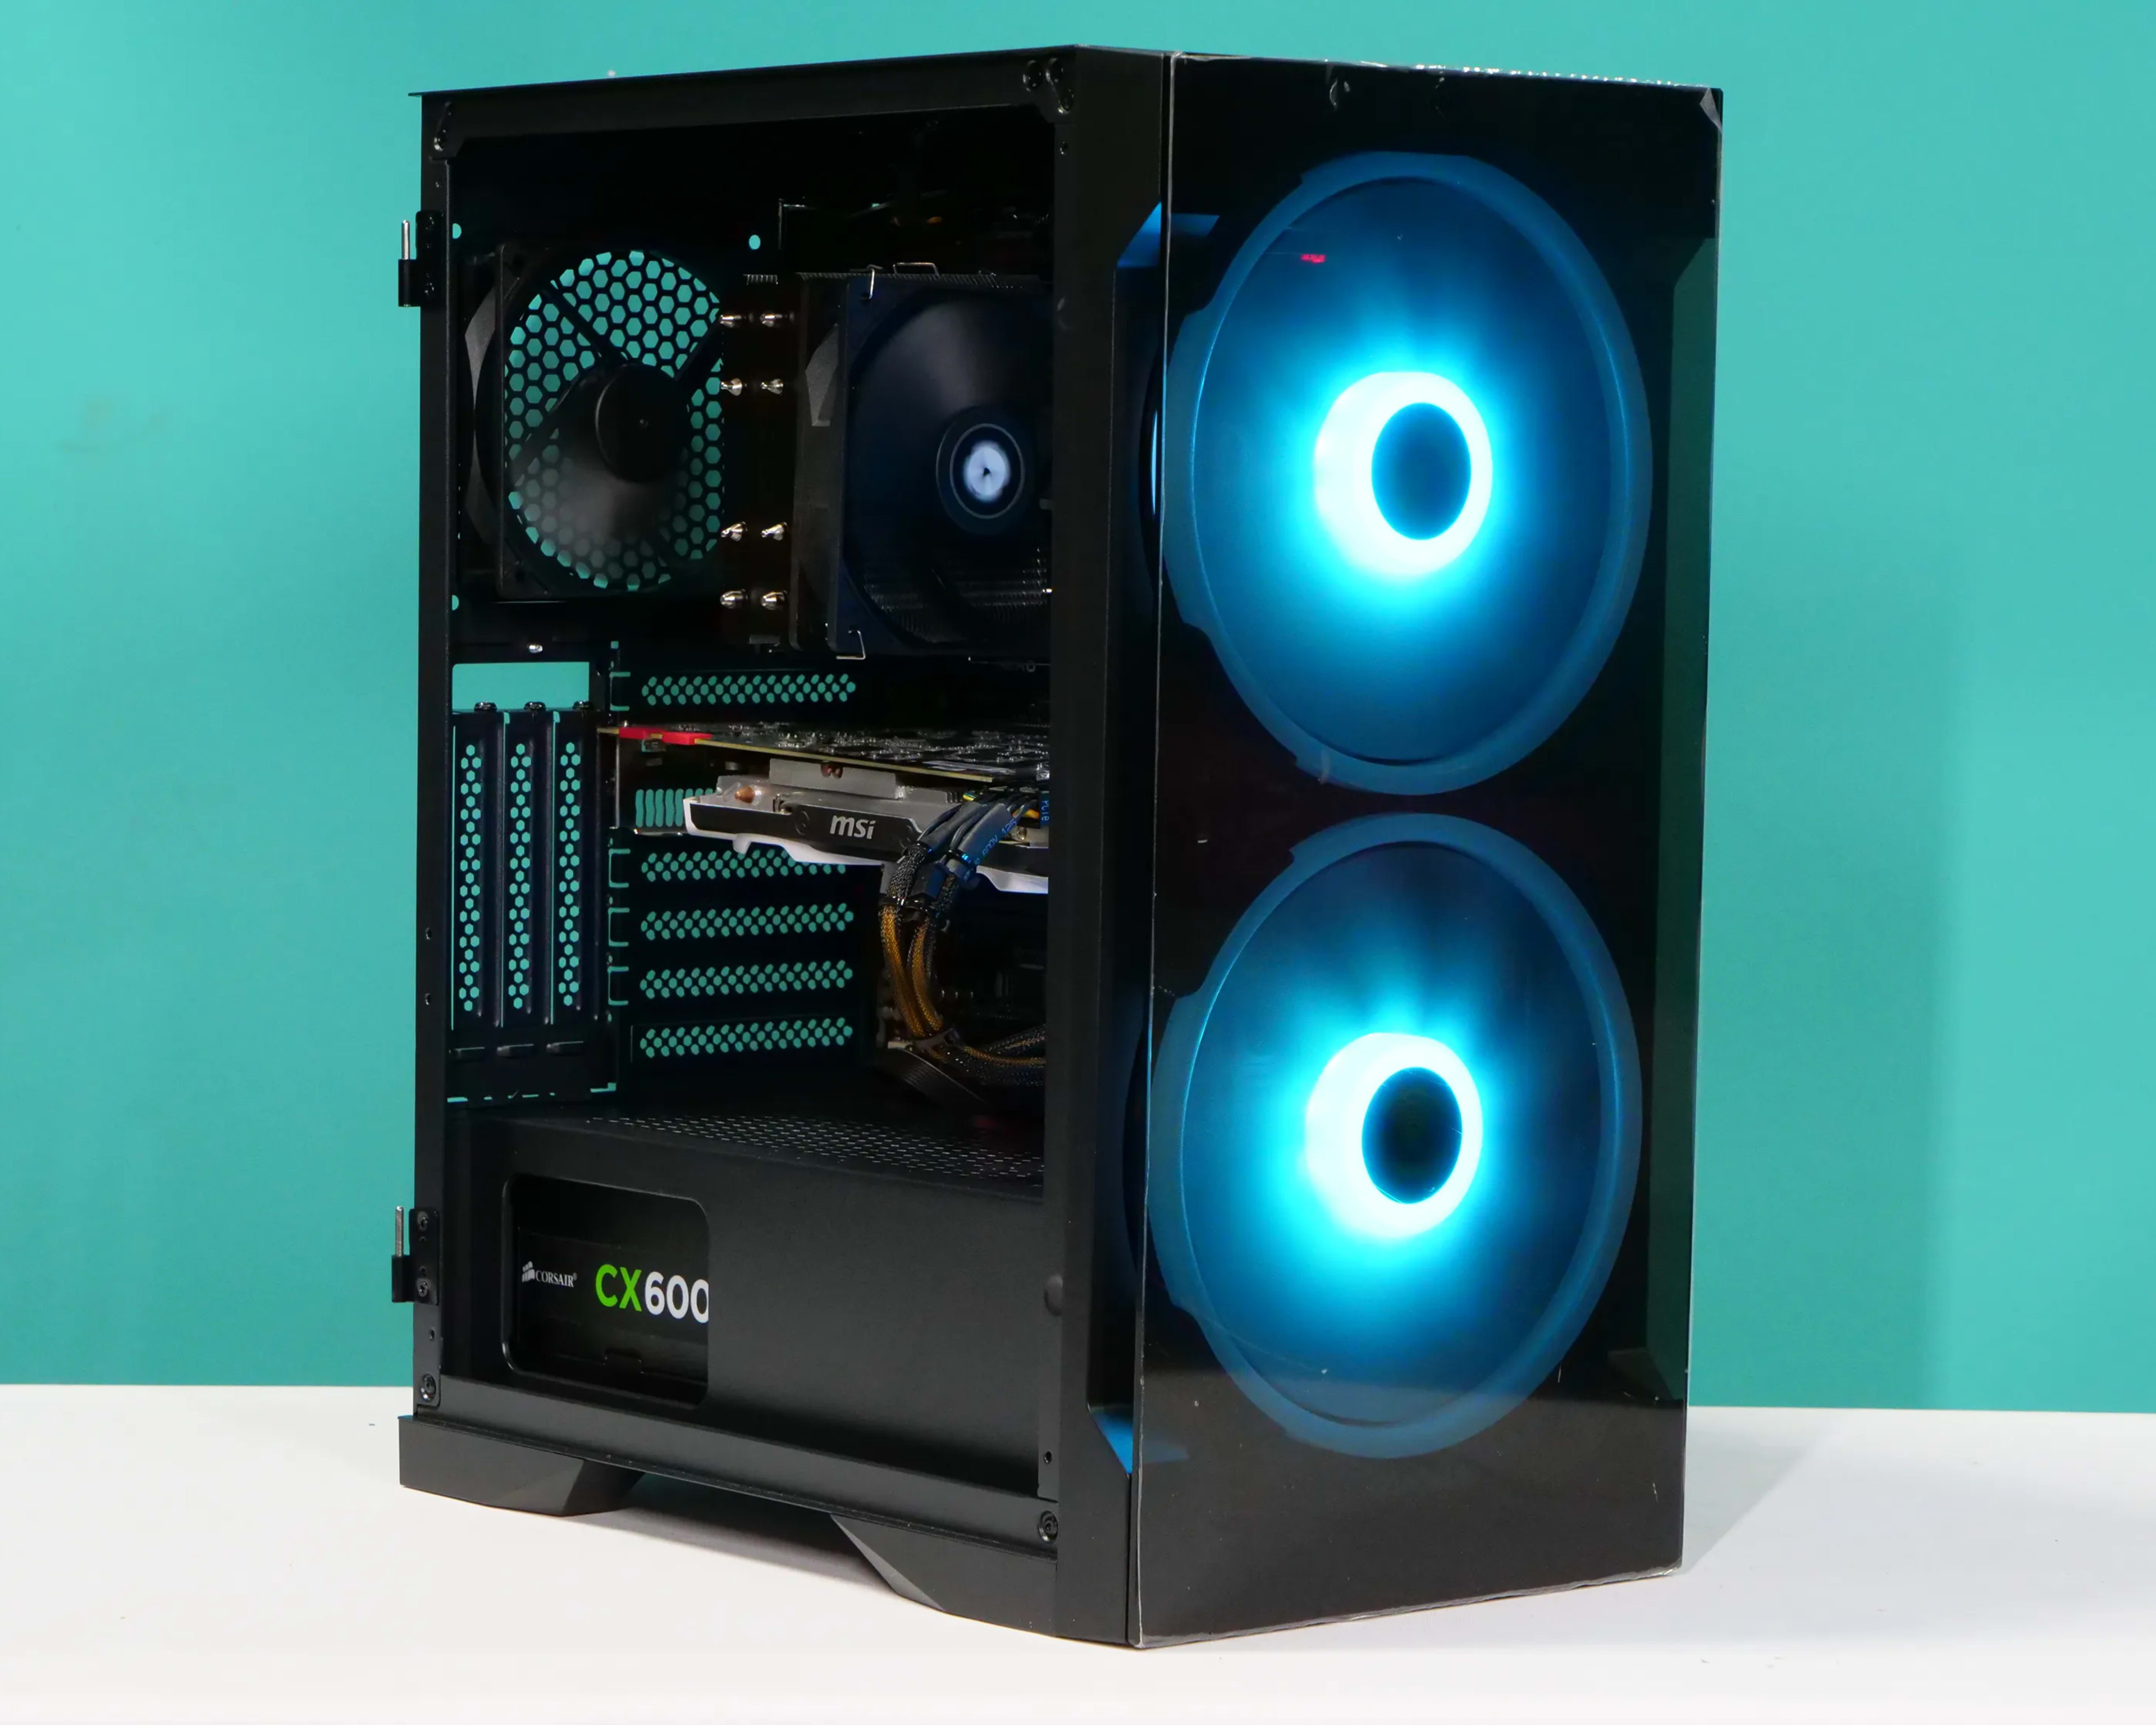 UCW Ready to Play "I Can Be Your Hero, Baby" e-sports build. (i7-6700k + GTX 970+ 32 gb) Free ship!